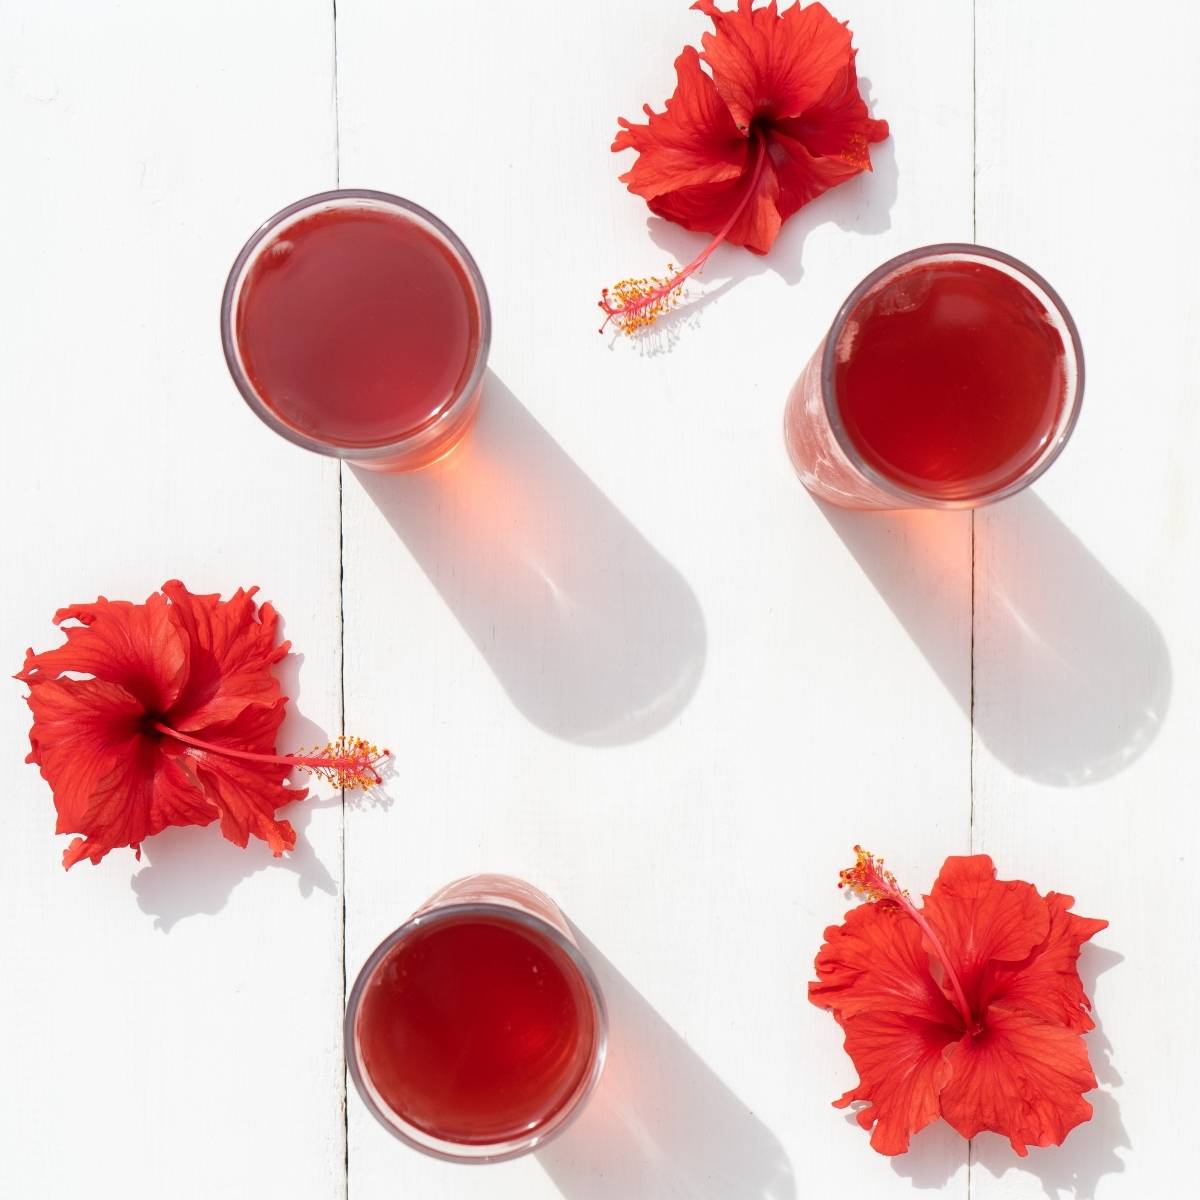 Hibiscus Water For High Blood Pressure